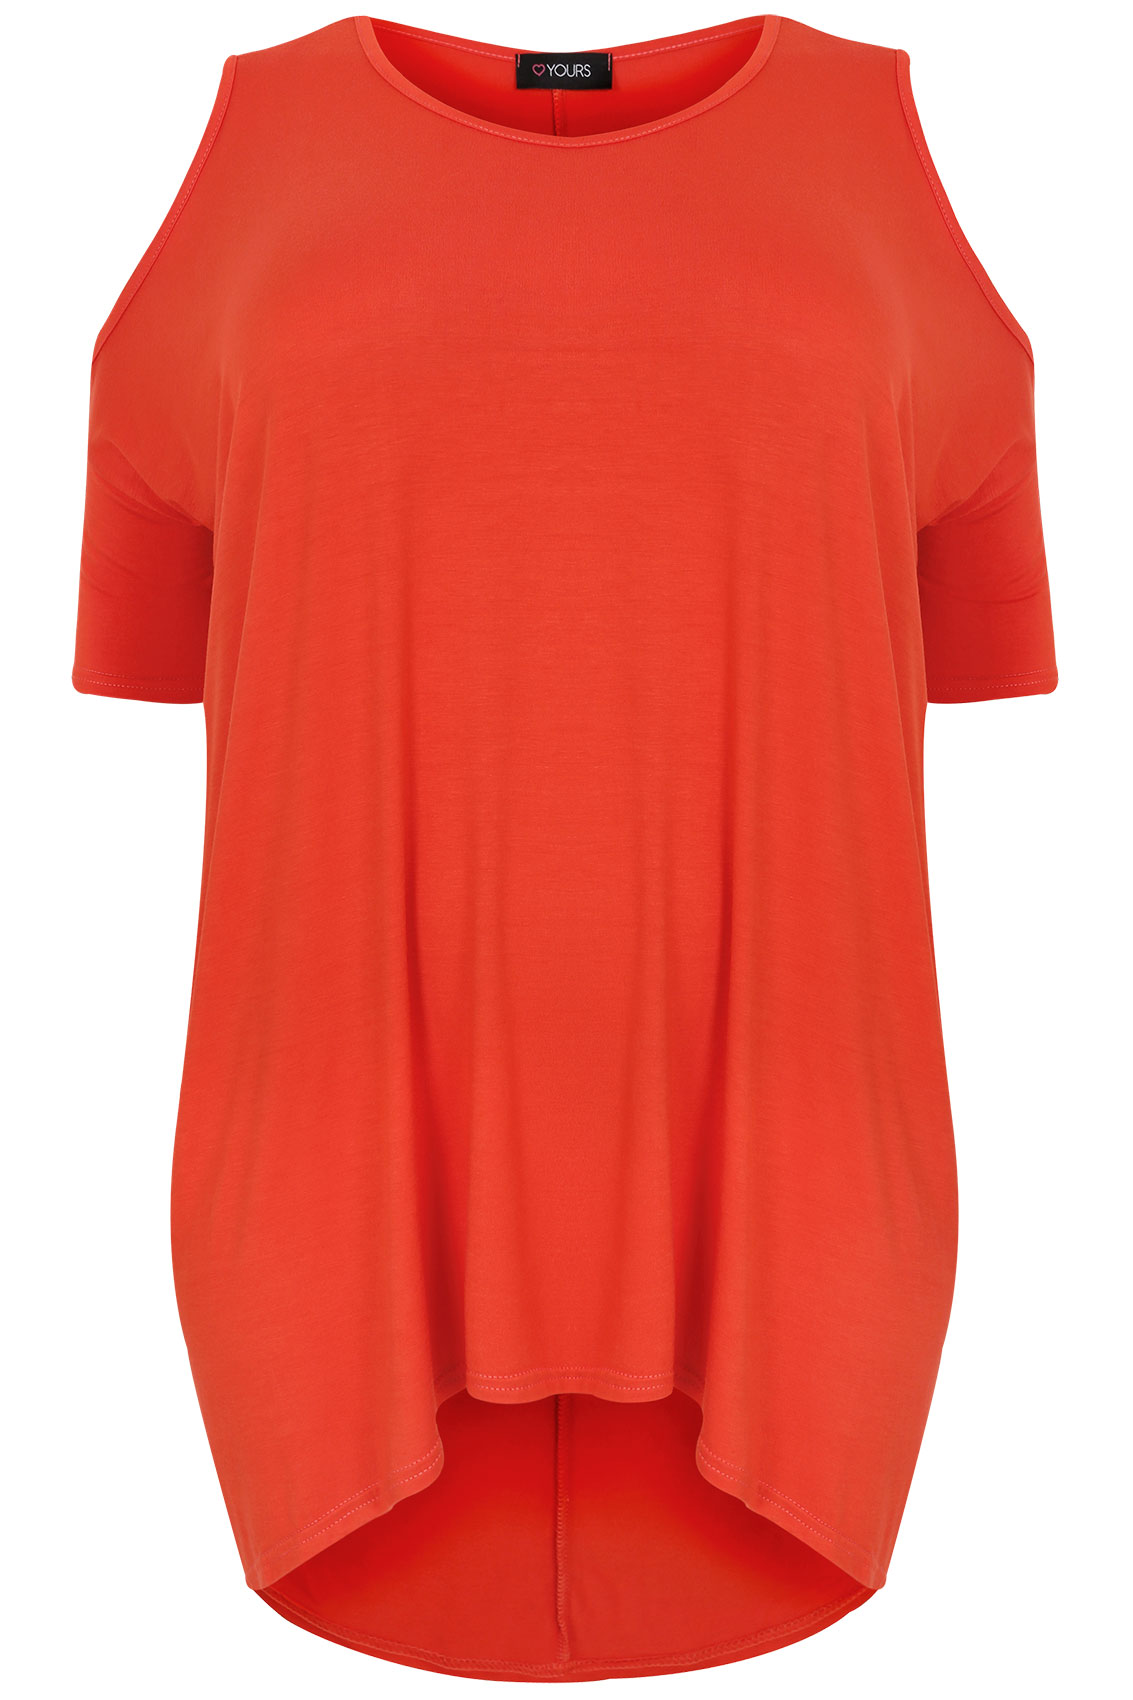 Orange Oversized Top With Cold Shoulder Cut Out & Extreme Dipped Hem ...